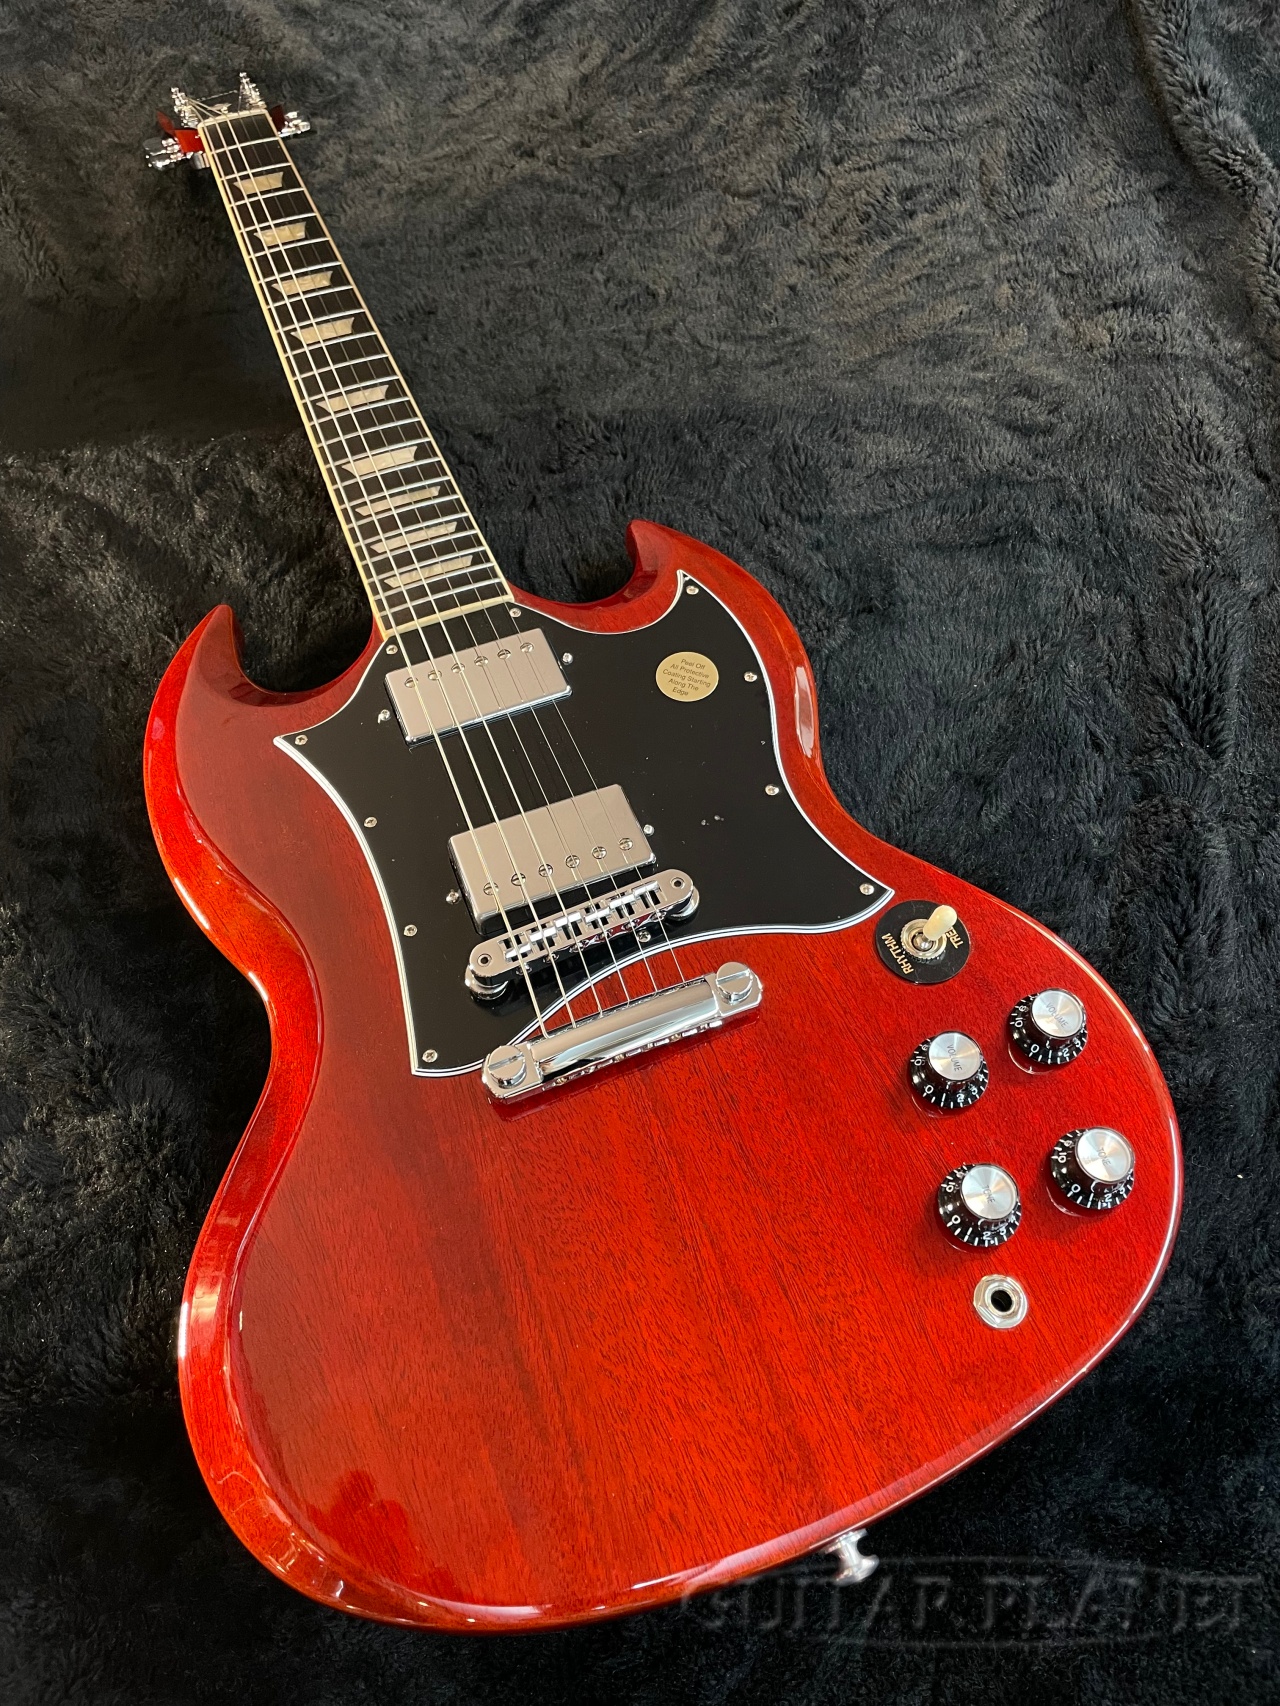 #214810065 3.06kg Gibson SG Standard -Heritage Cherry- 高い素材 新品 ギブソン 激安正規品 エレキギター Electric Guitar スタンダード チェリー レッド Red 赤